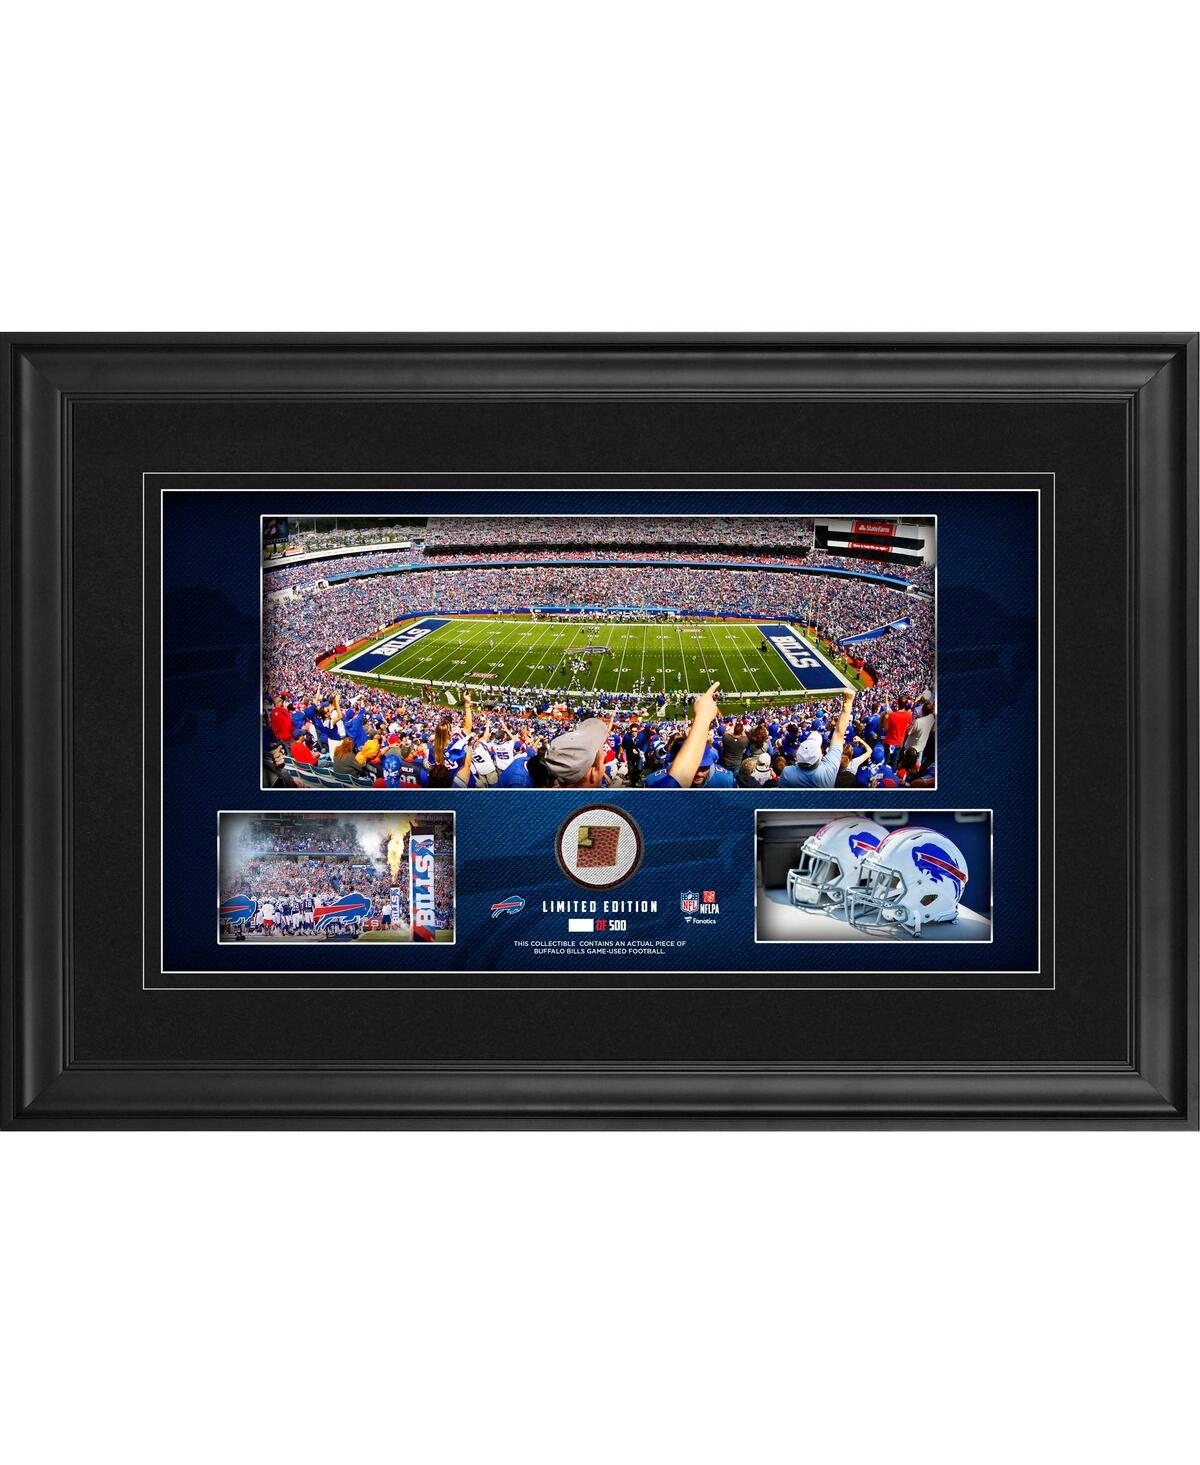 Fanatics Authentic Buffalo Bills Framed 10" X 18" Stadium Panoramic Collage With Game-used Football In Black